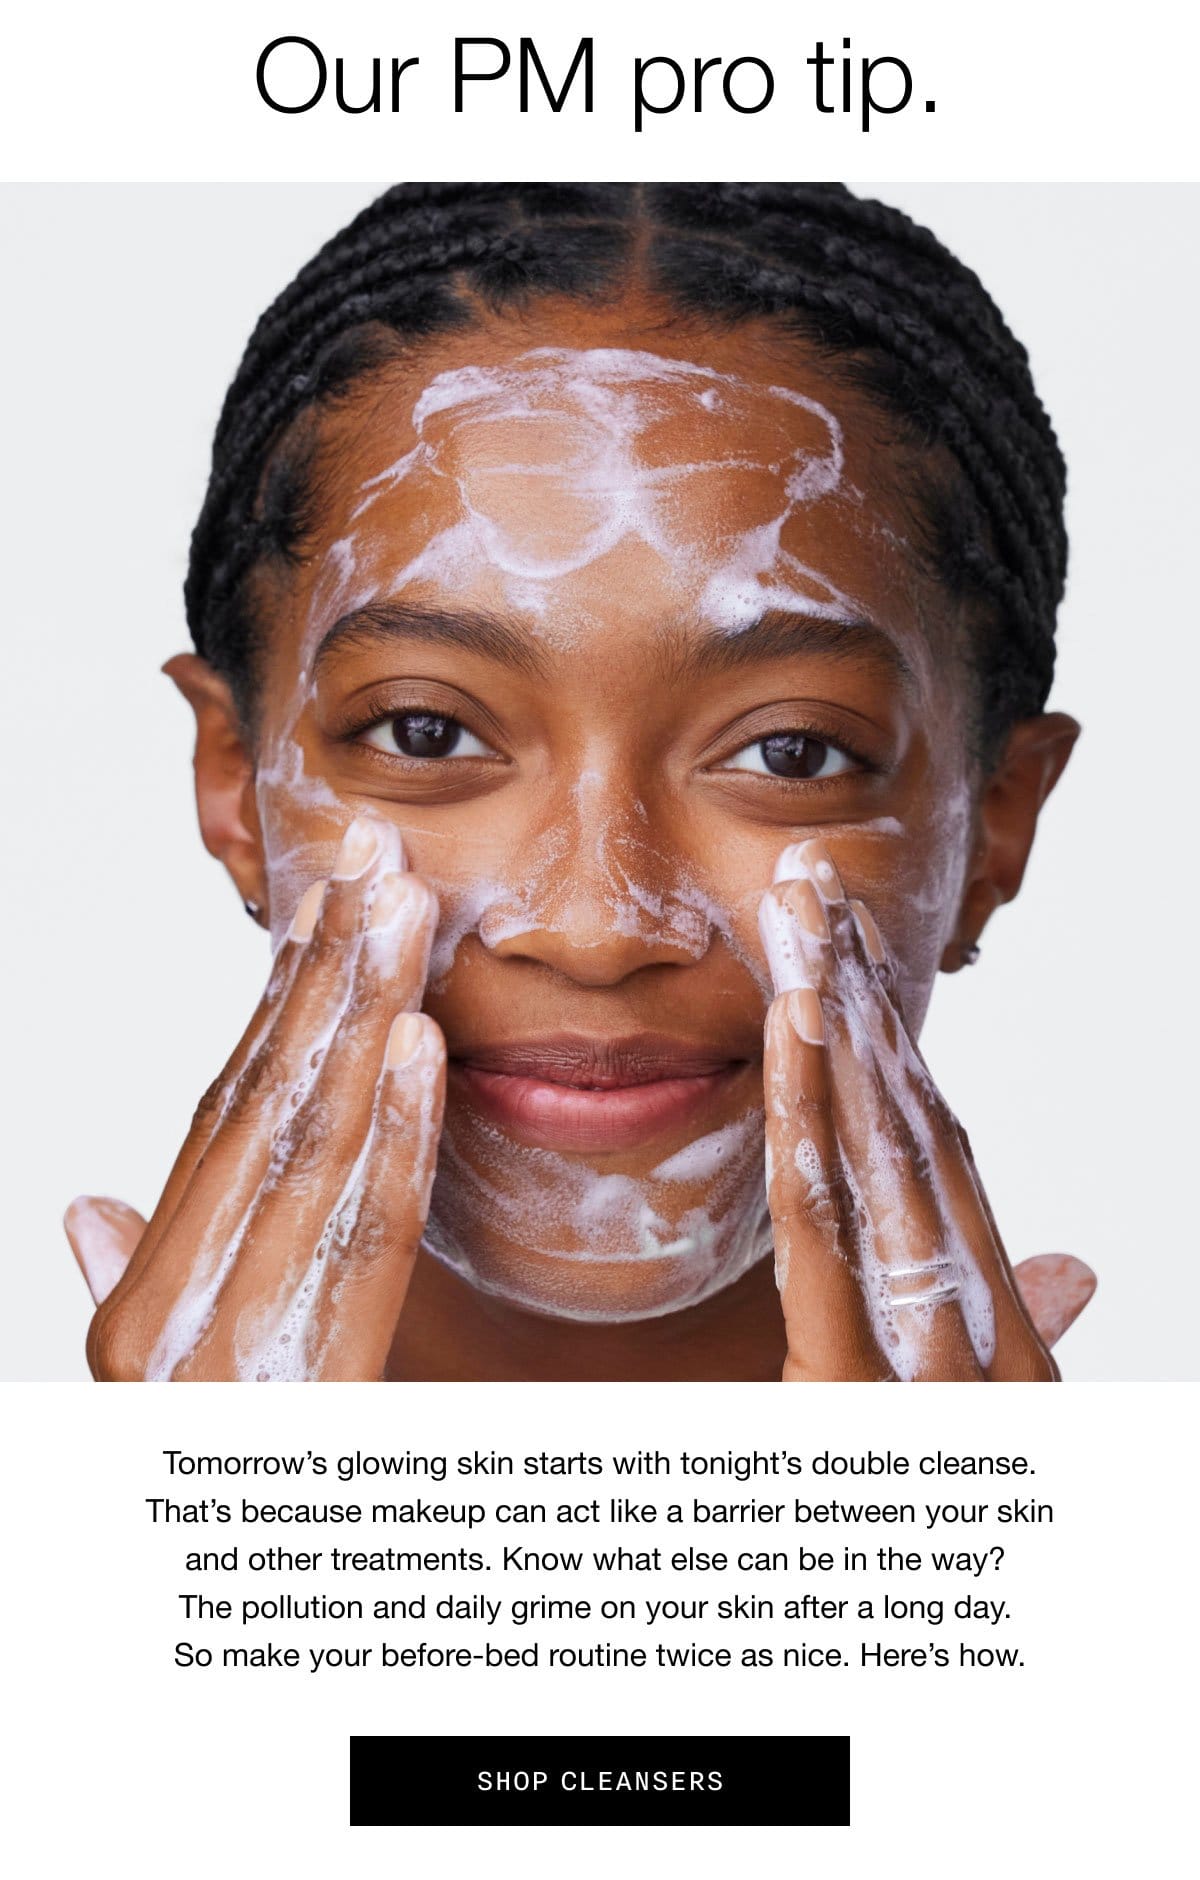 Our PM pro tip. | Tomorrow’s glowing skin starts with tonight’s double cleanse. That’s because makeup can act like a barrier between your skin and other treatments. Know what else can be in the way? The pollution and daily grime on your skin after a long day. So make your before-bed routine twice as nice. Here’s how. | Shop Cleansers